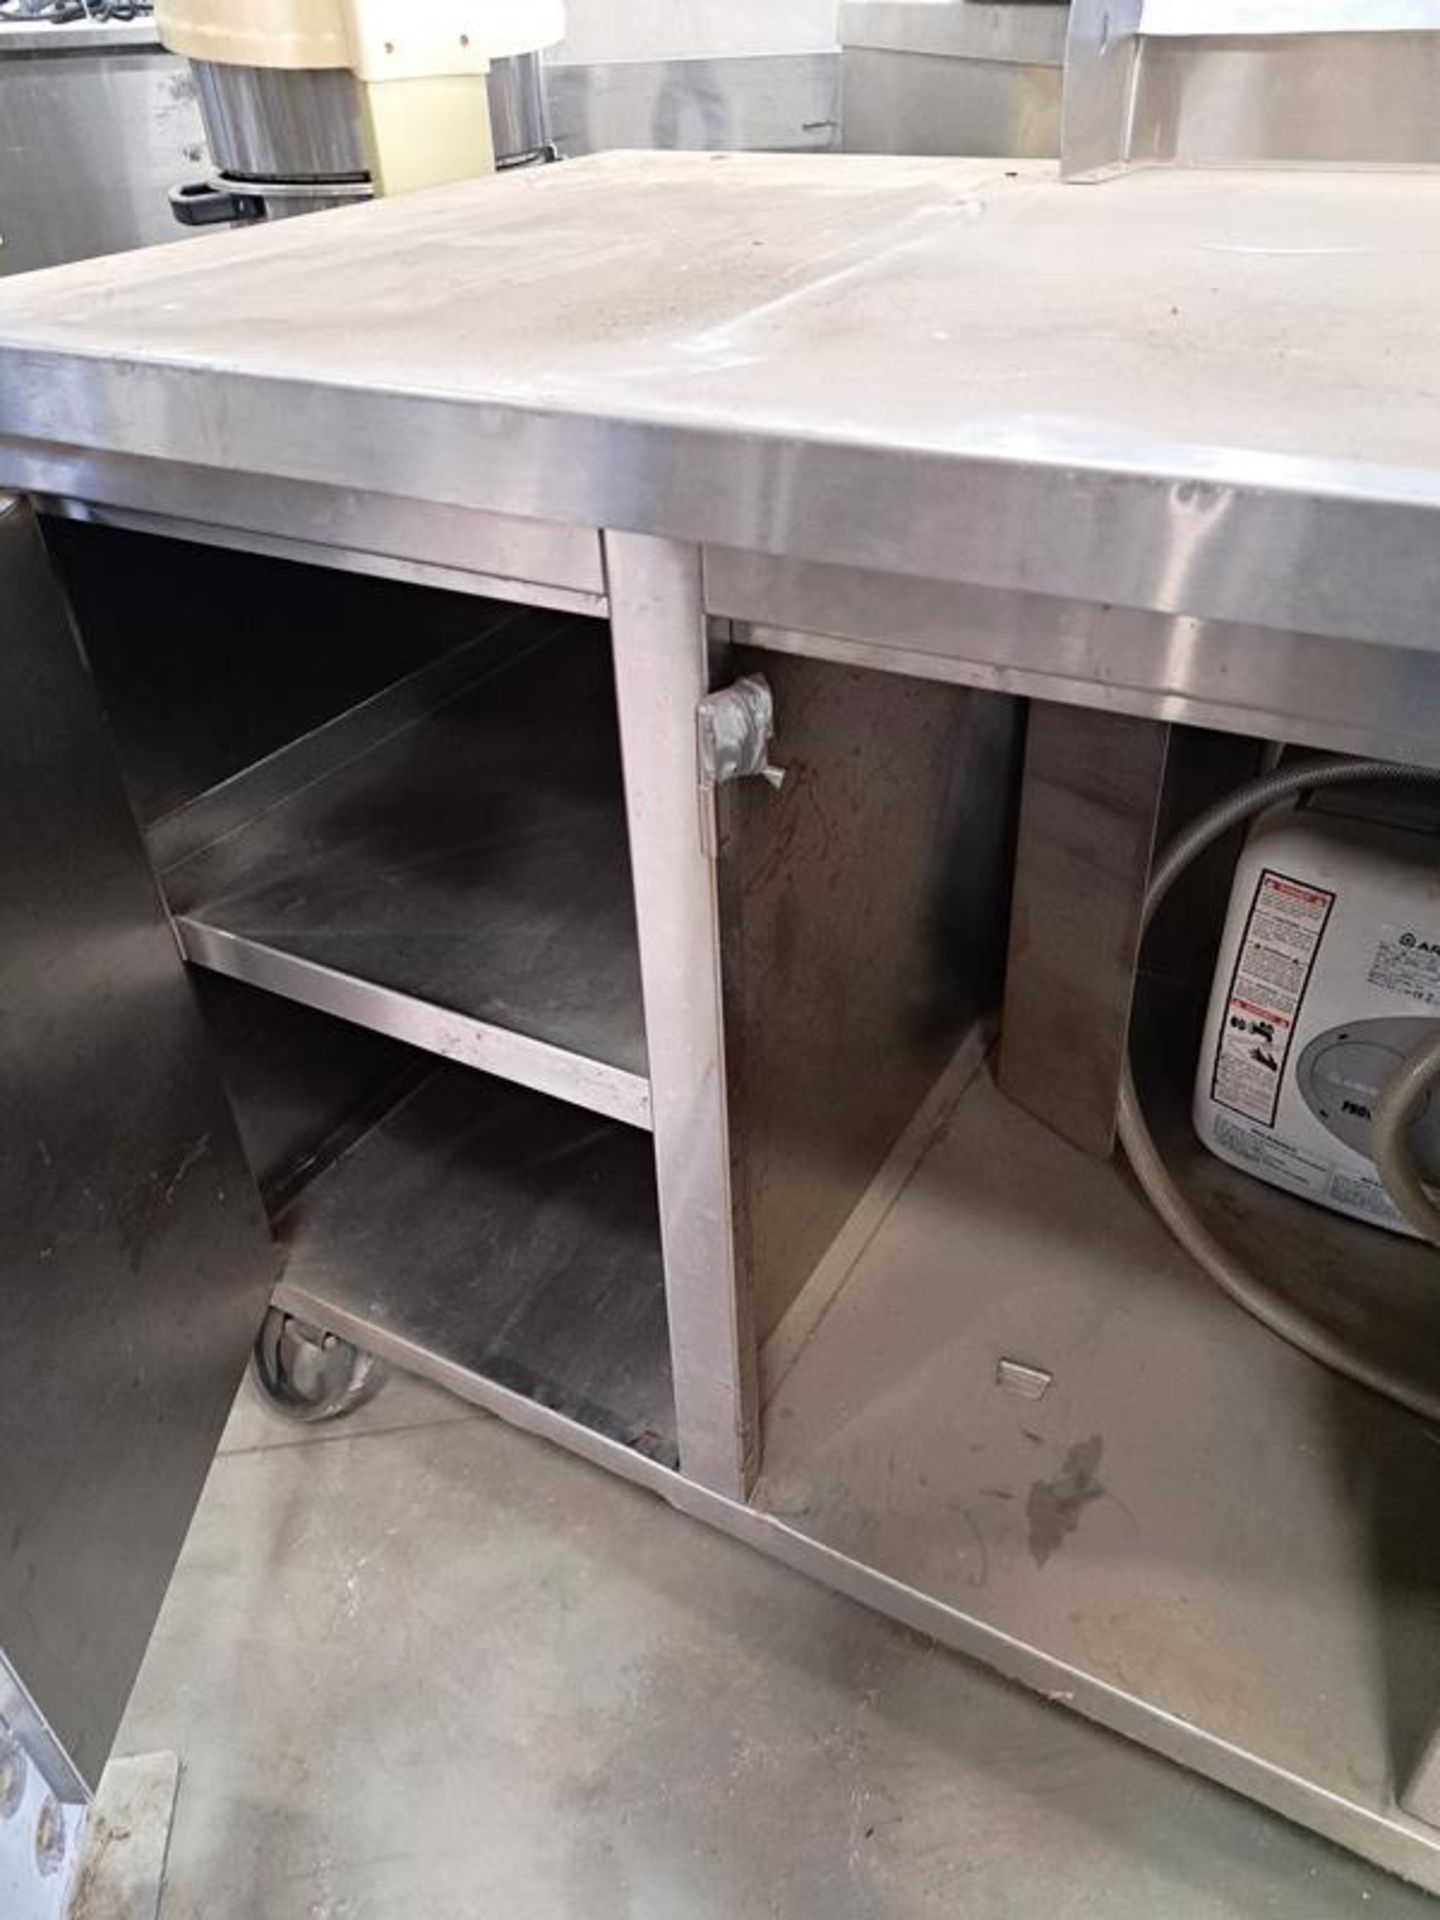 Refrigerated Prep Table with sink, 30" wide X 54" long X 30" deep (Required Loading Fee: $25.00) - Image 2 of 3